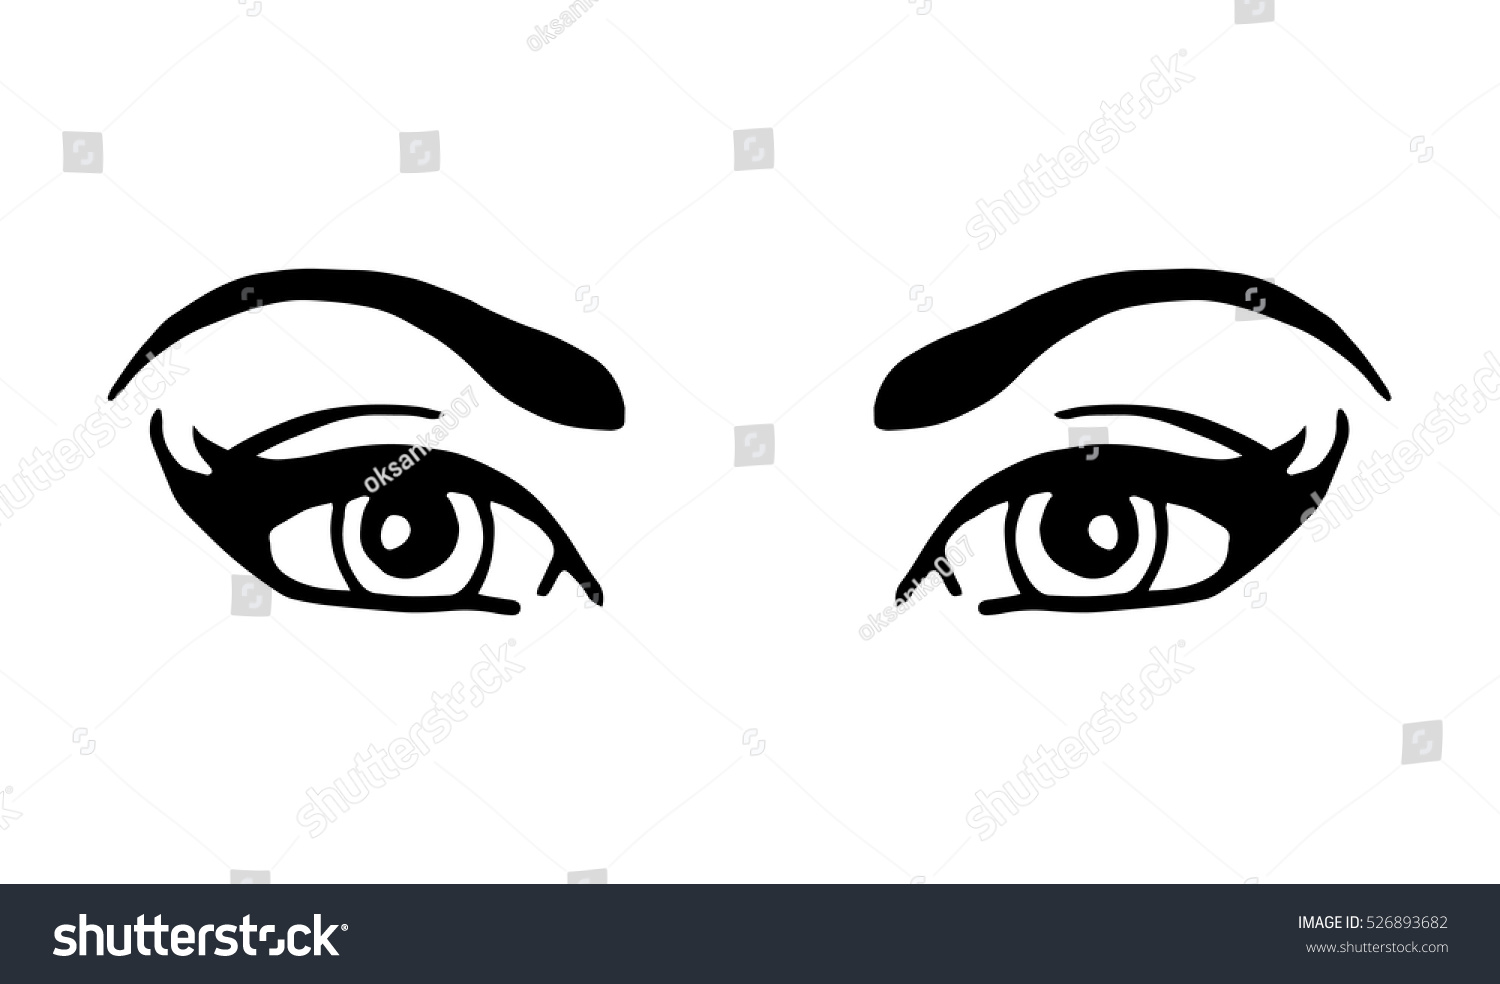 Woman Eyes Eyebrows Close Up Isolated Stock Vector 526893682 - Shutterstock